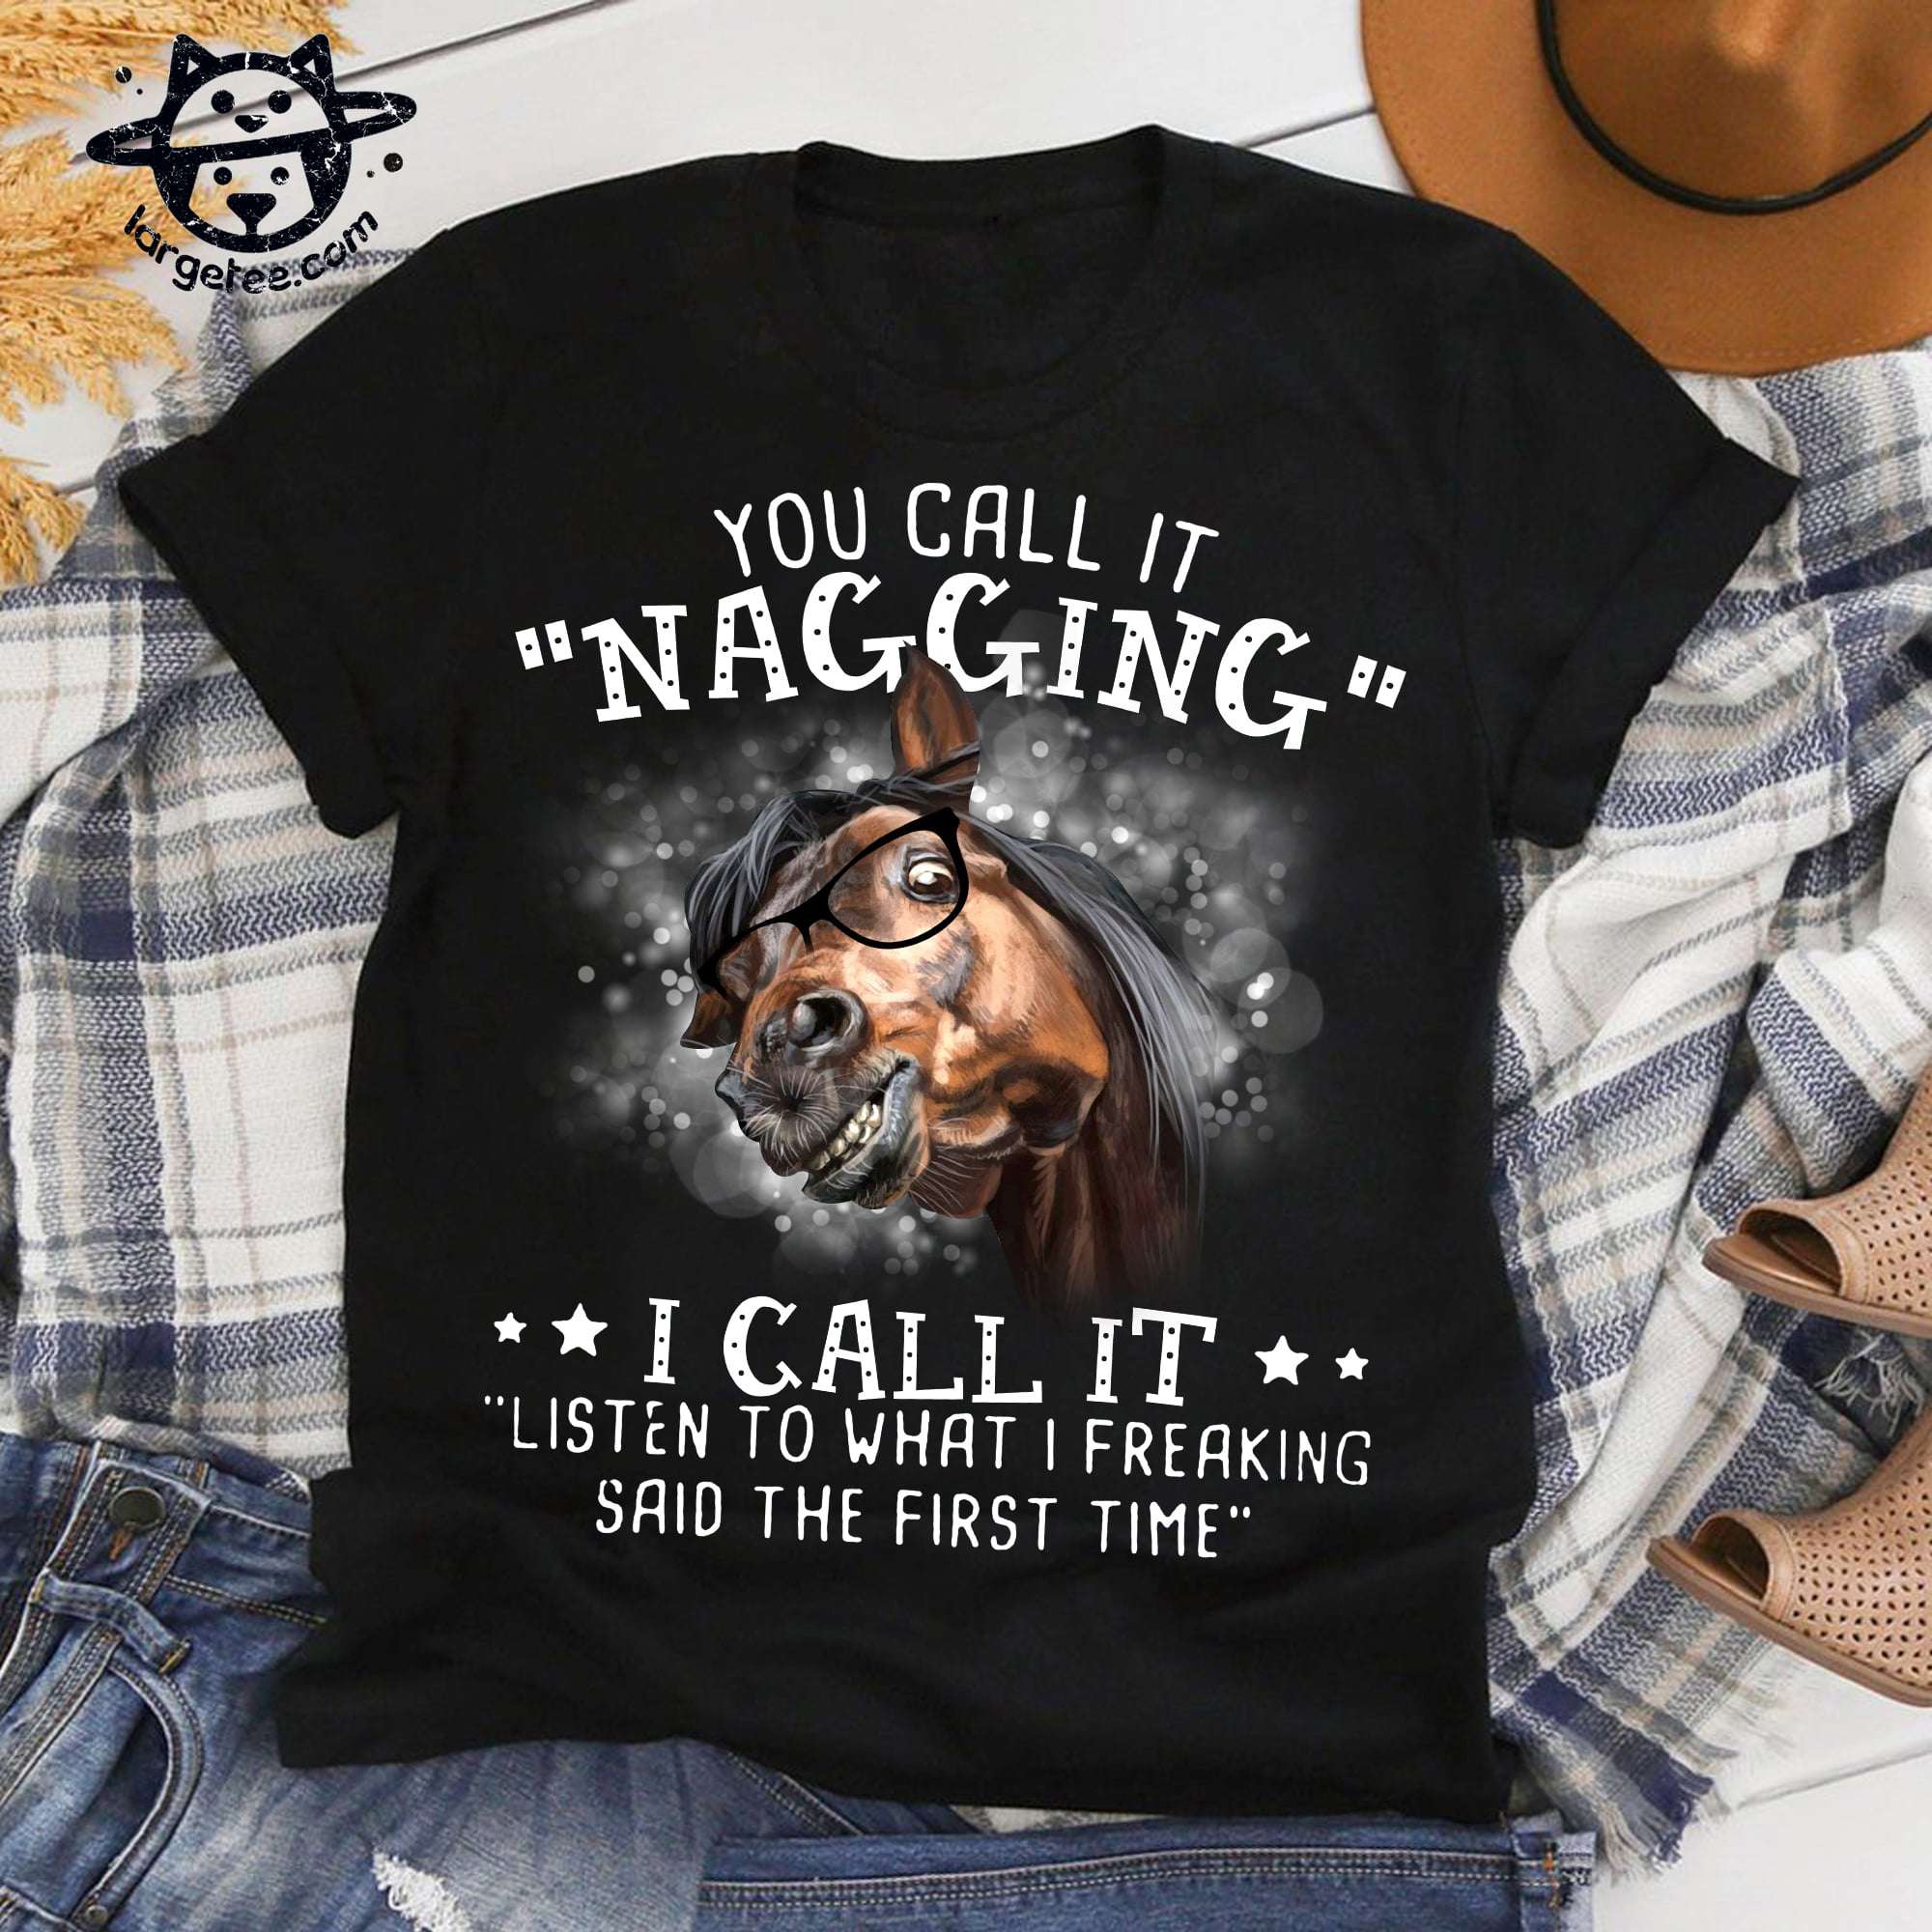 You call it nagging I call it listen to what I freaking said the first time - Funny horse graphic T-shirt